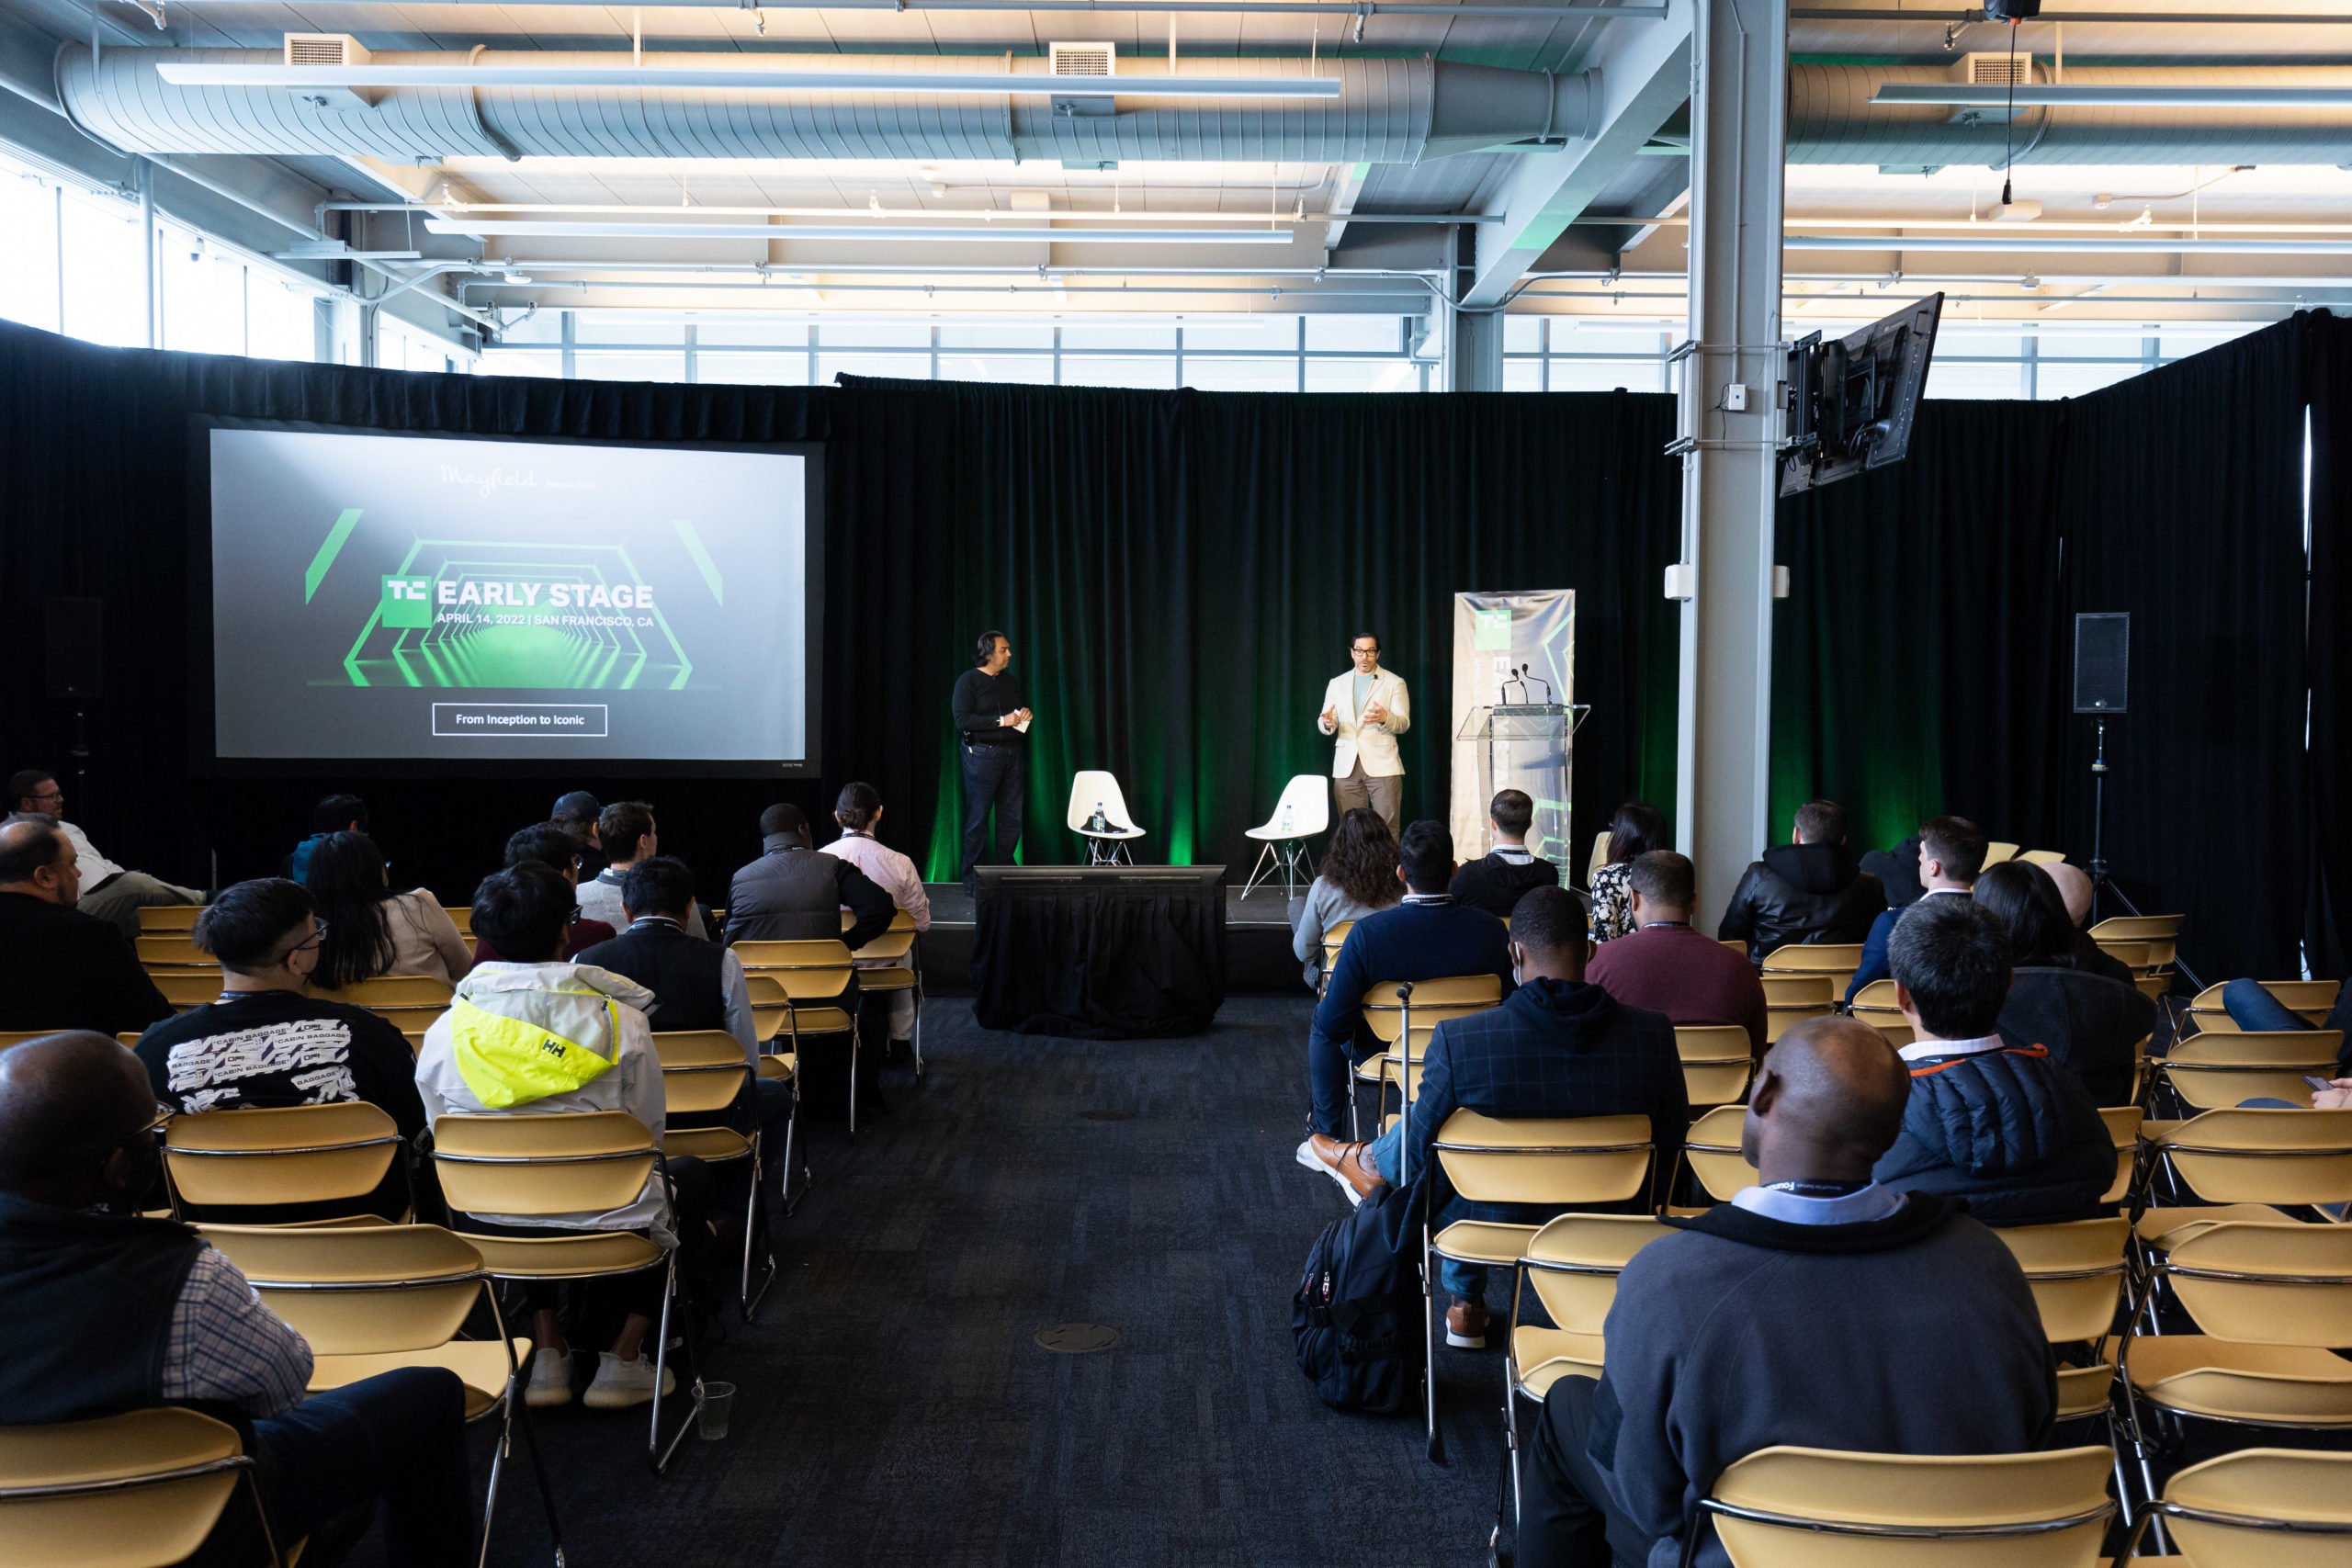 Rajeev Batra and Manny Medina standing on the stage in front of audience at TechCrunch Early Stage